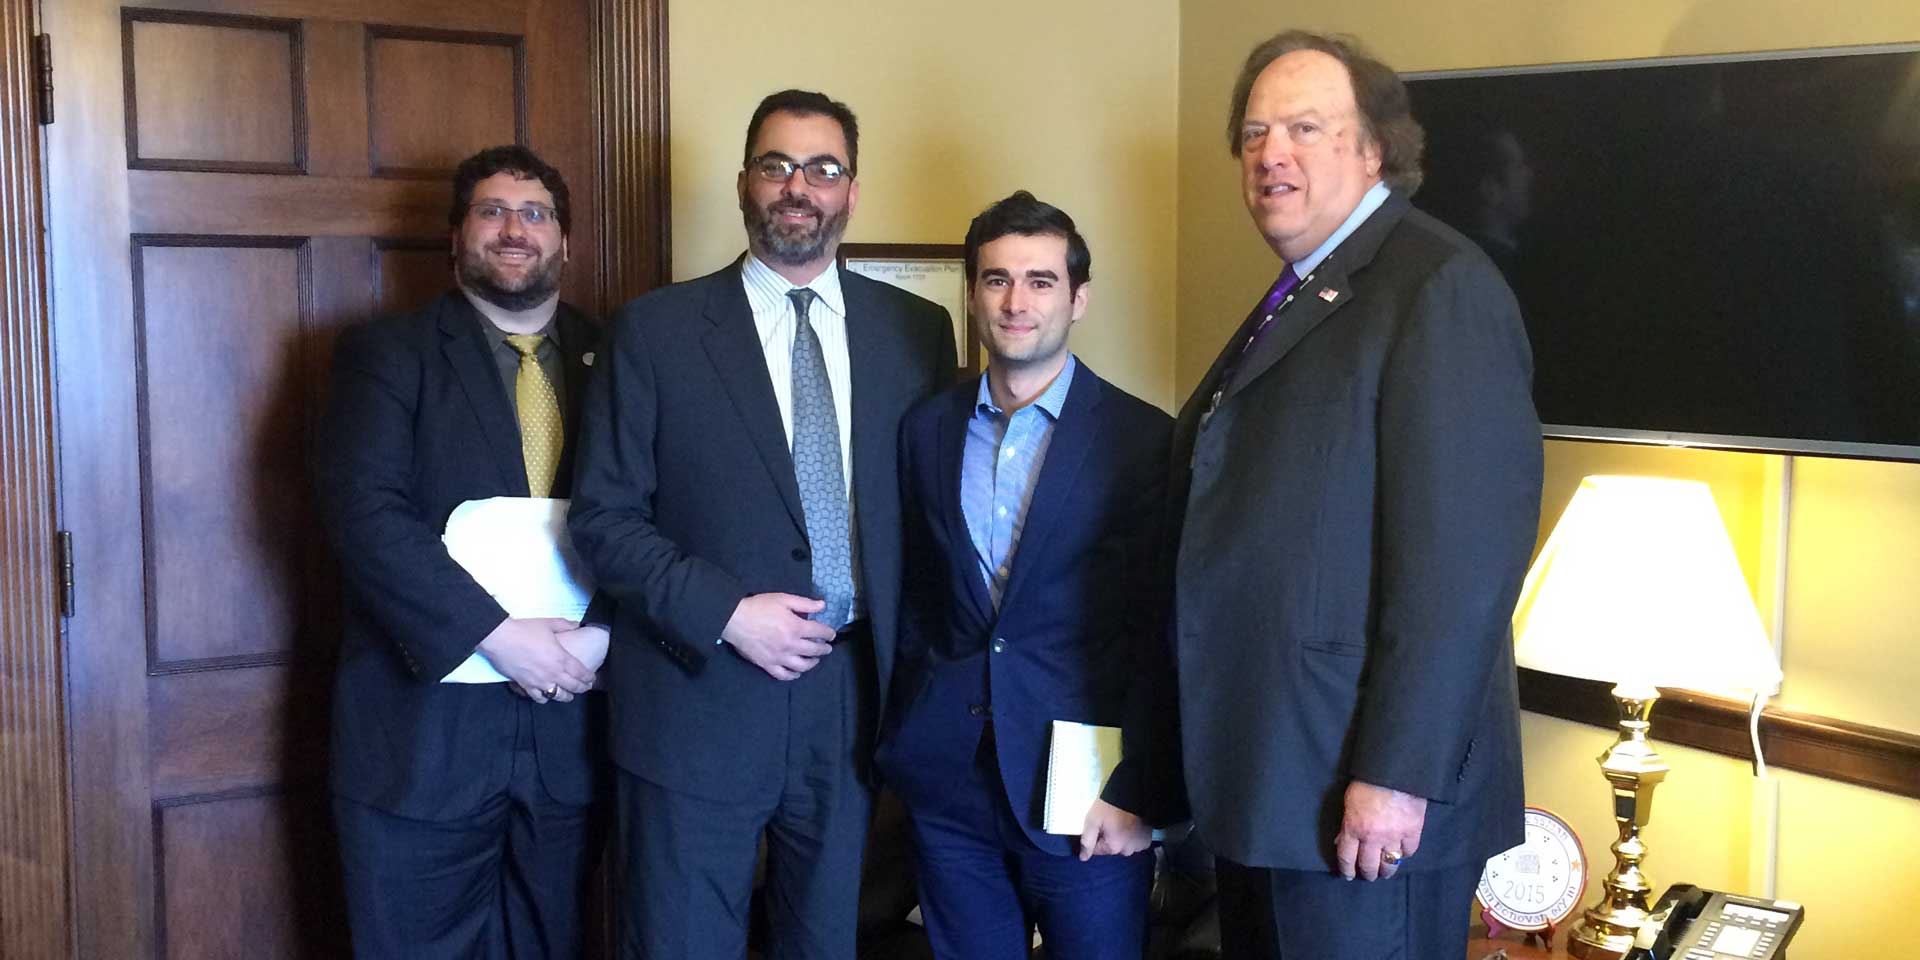 L-R: PIANY-YIP President Jason E. Bartow ; PIANY Director Anthony Kammas; Counsel to Rep. Dan Donovan, R-11; and PIANY past President Jeffrey H. Greenfield.